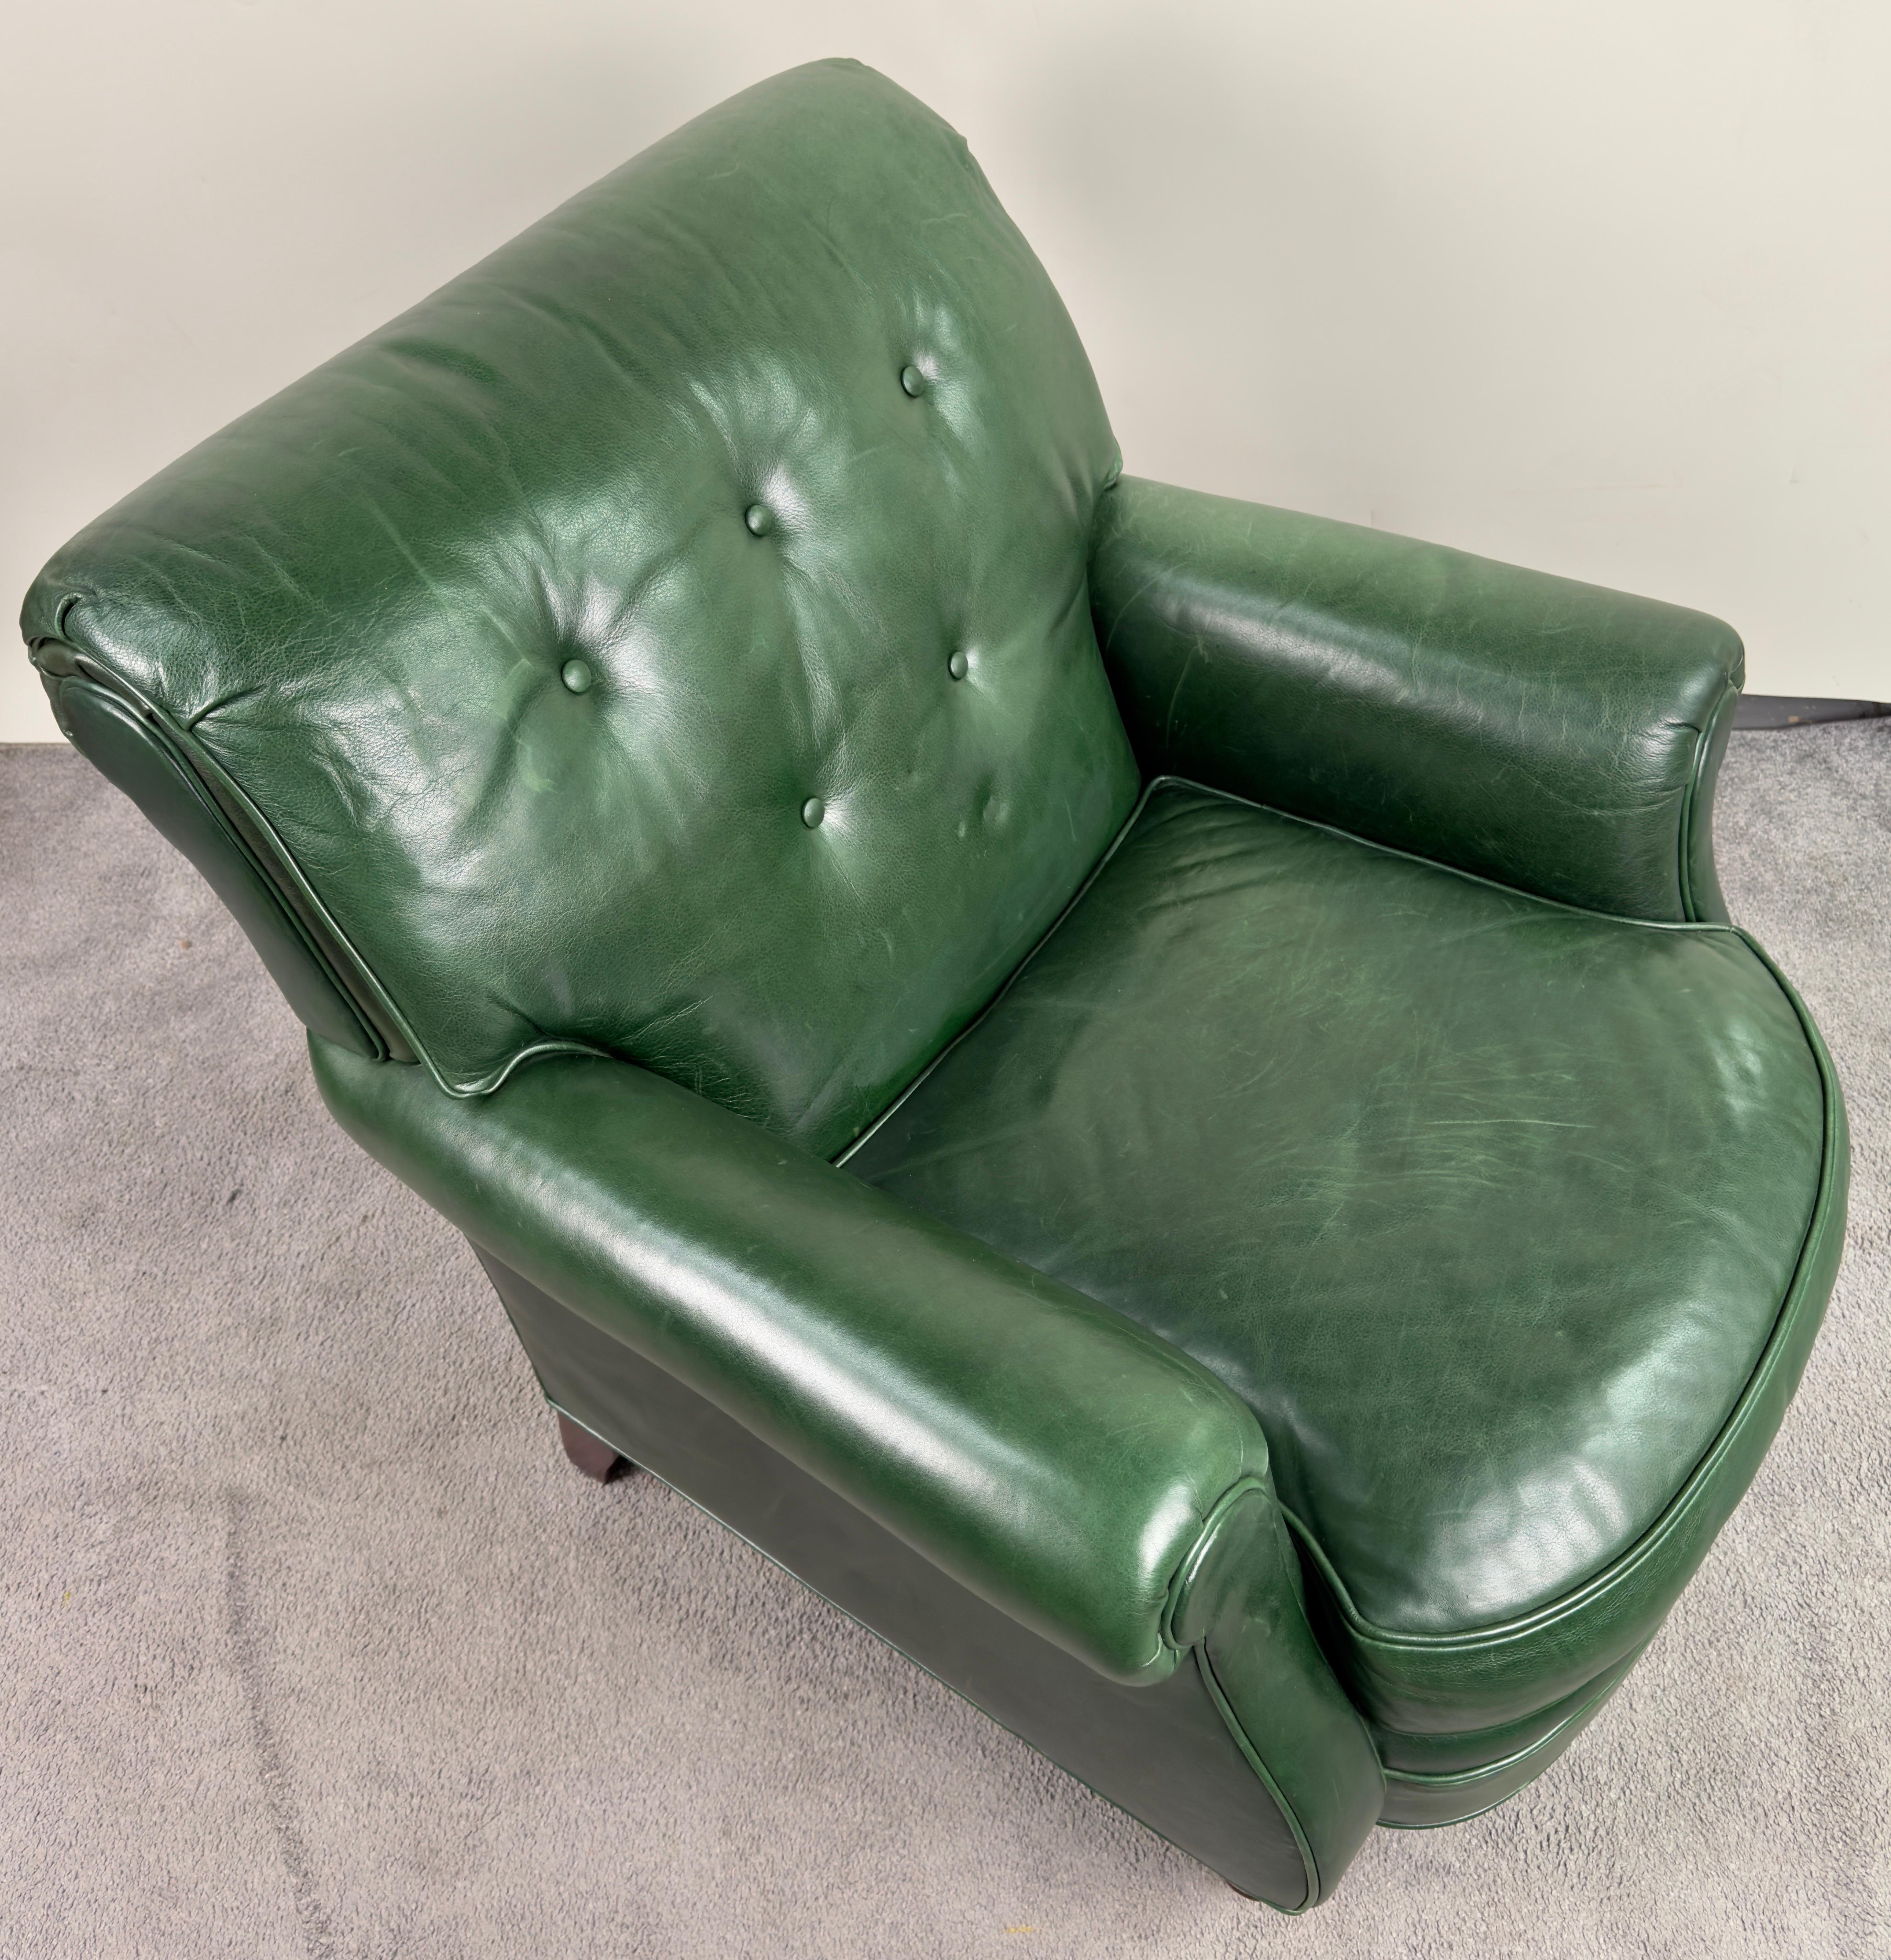 20th Century Hickory Chair English Style Green leather Club Chair 